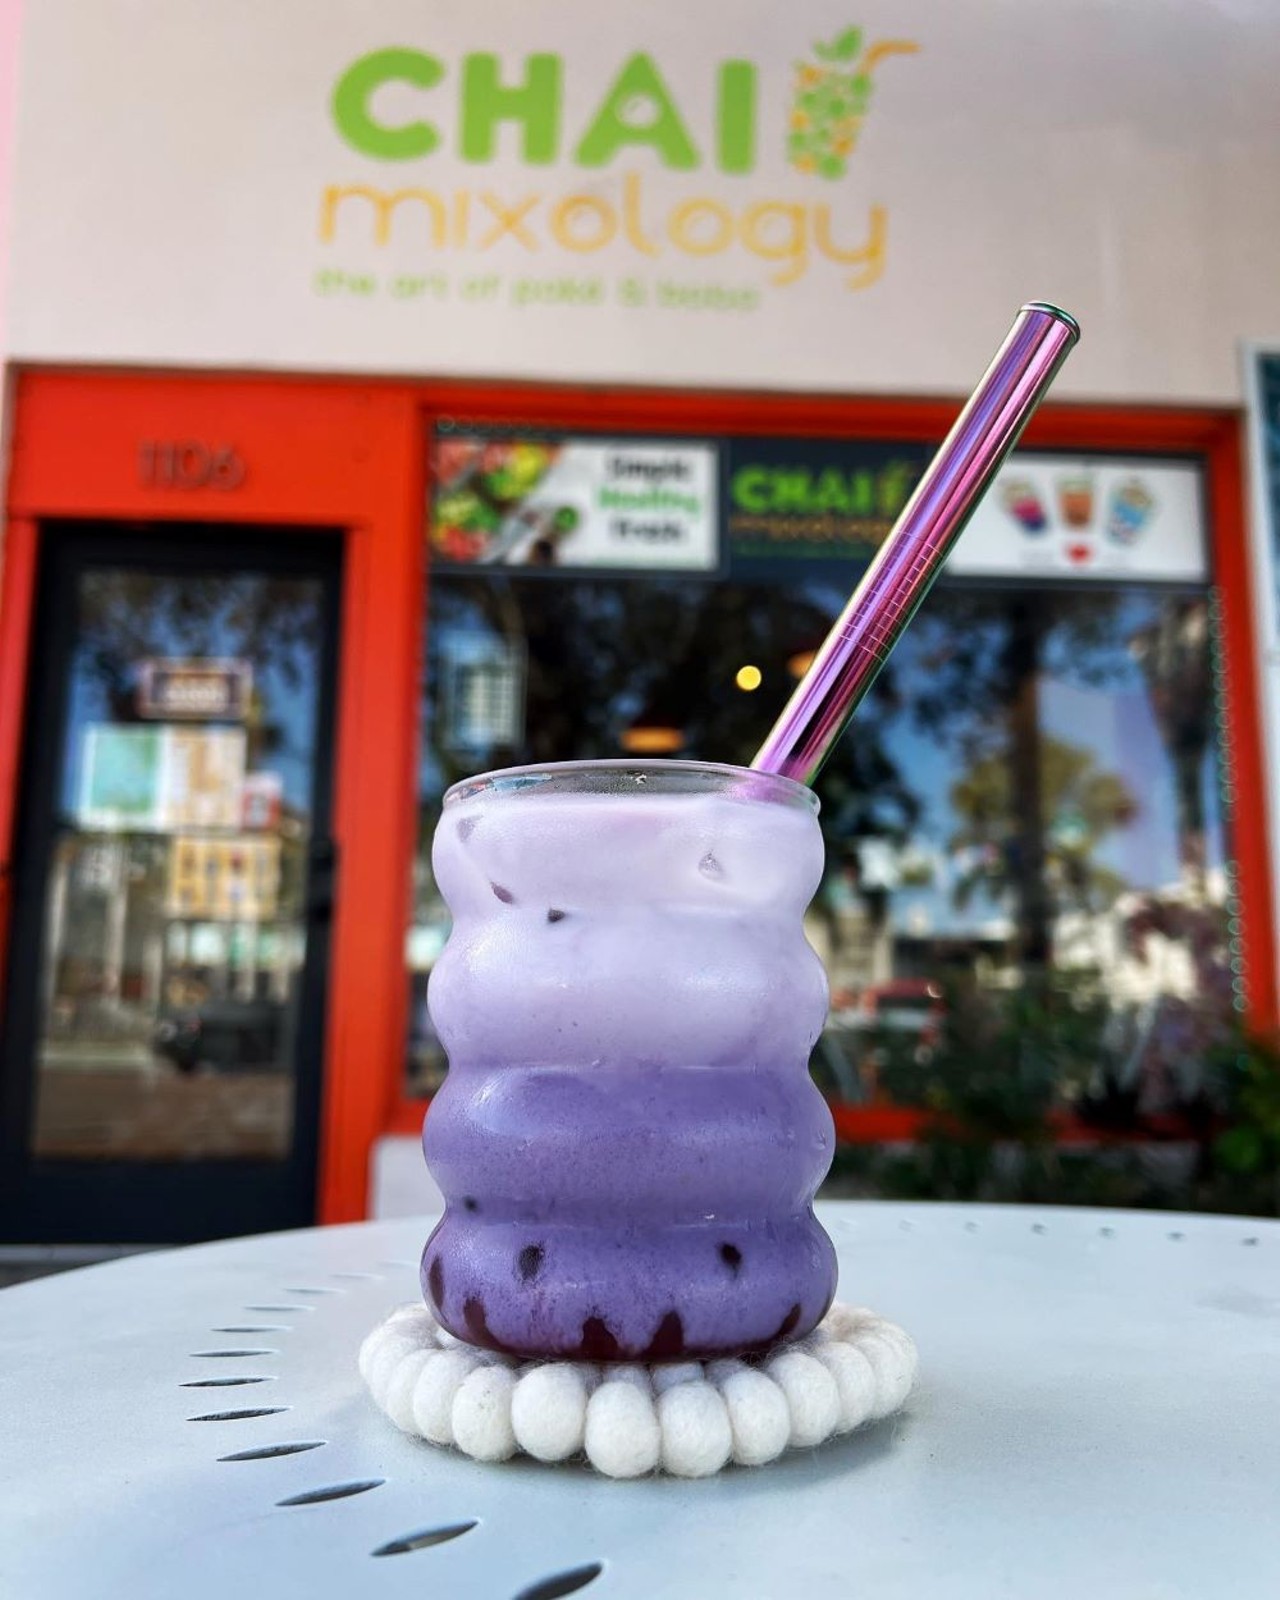 Chai Mixology
1106 Central Ave., St. Petersburg
While poke and smoothie bowls are the stars of Chai Mixology’s menu, its variety of boba teas offer a refreshing addition to its health-conscious dishes. Its boba offerings range from expected milk teas like taro and mango to unique flavors such as vanilla chai, honeydew, cookies and cream and rose. Toppings include classic tapioca pearls, popping boba, and rainbow jellies.
Photo via  Chai Mixology/Facebook